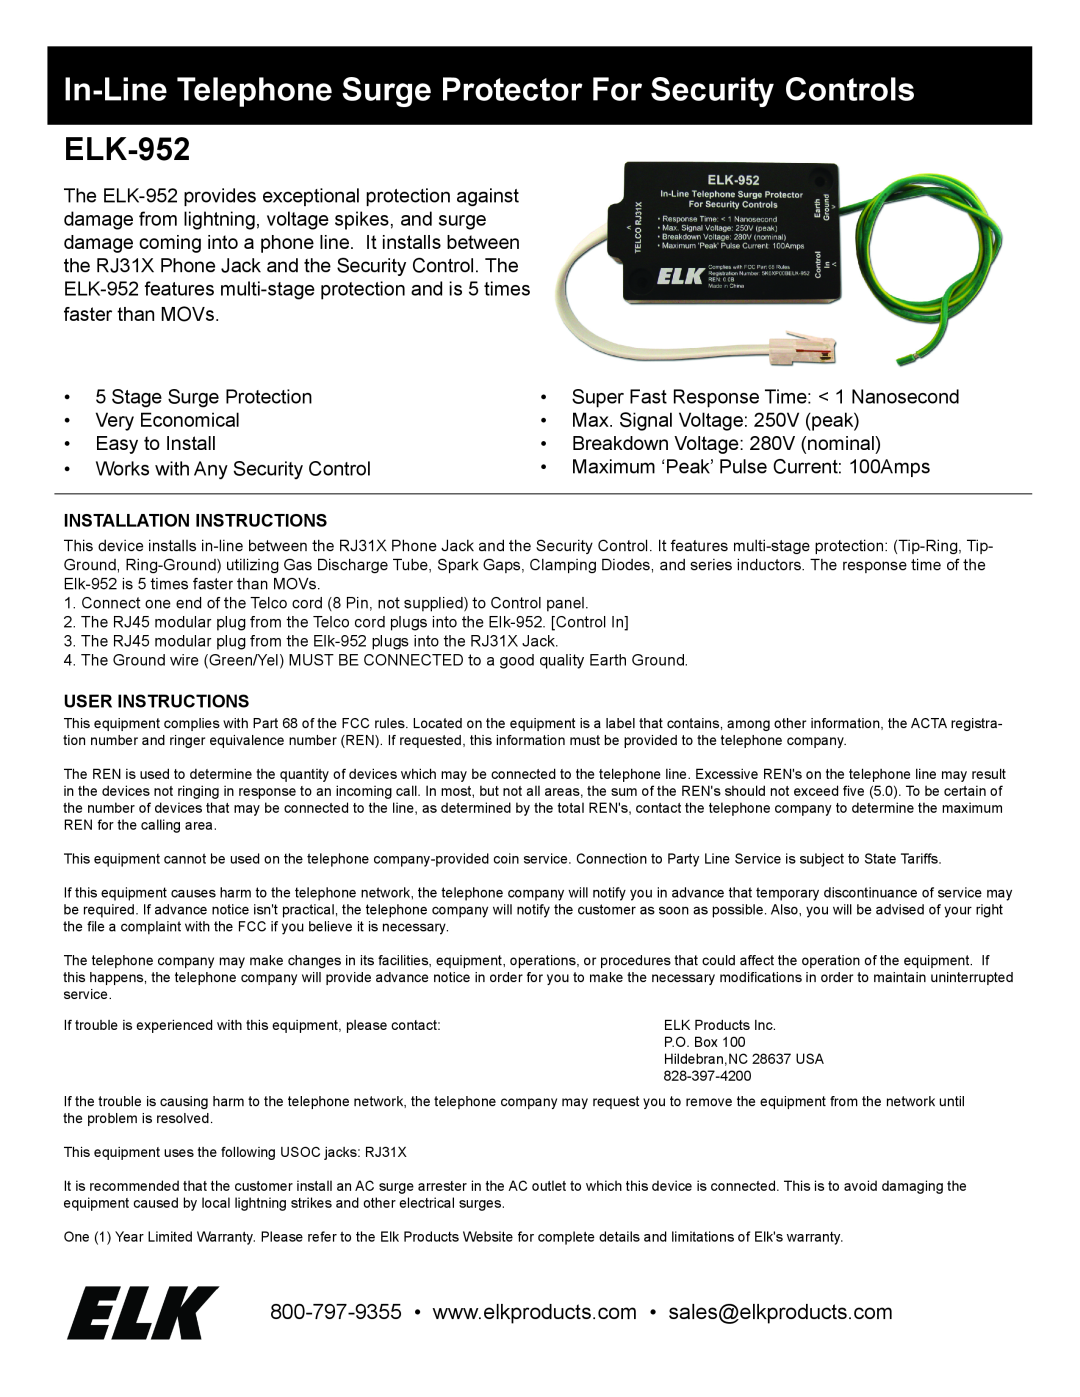 Elk installation instructions In-Line Telephone Surge Protector For Security Controls, ELK-952, Stage Surge Protection 